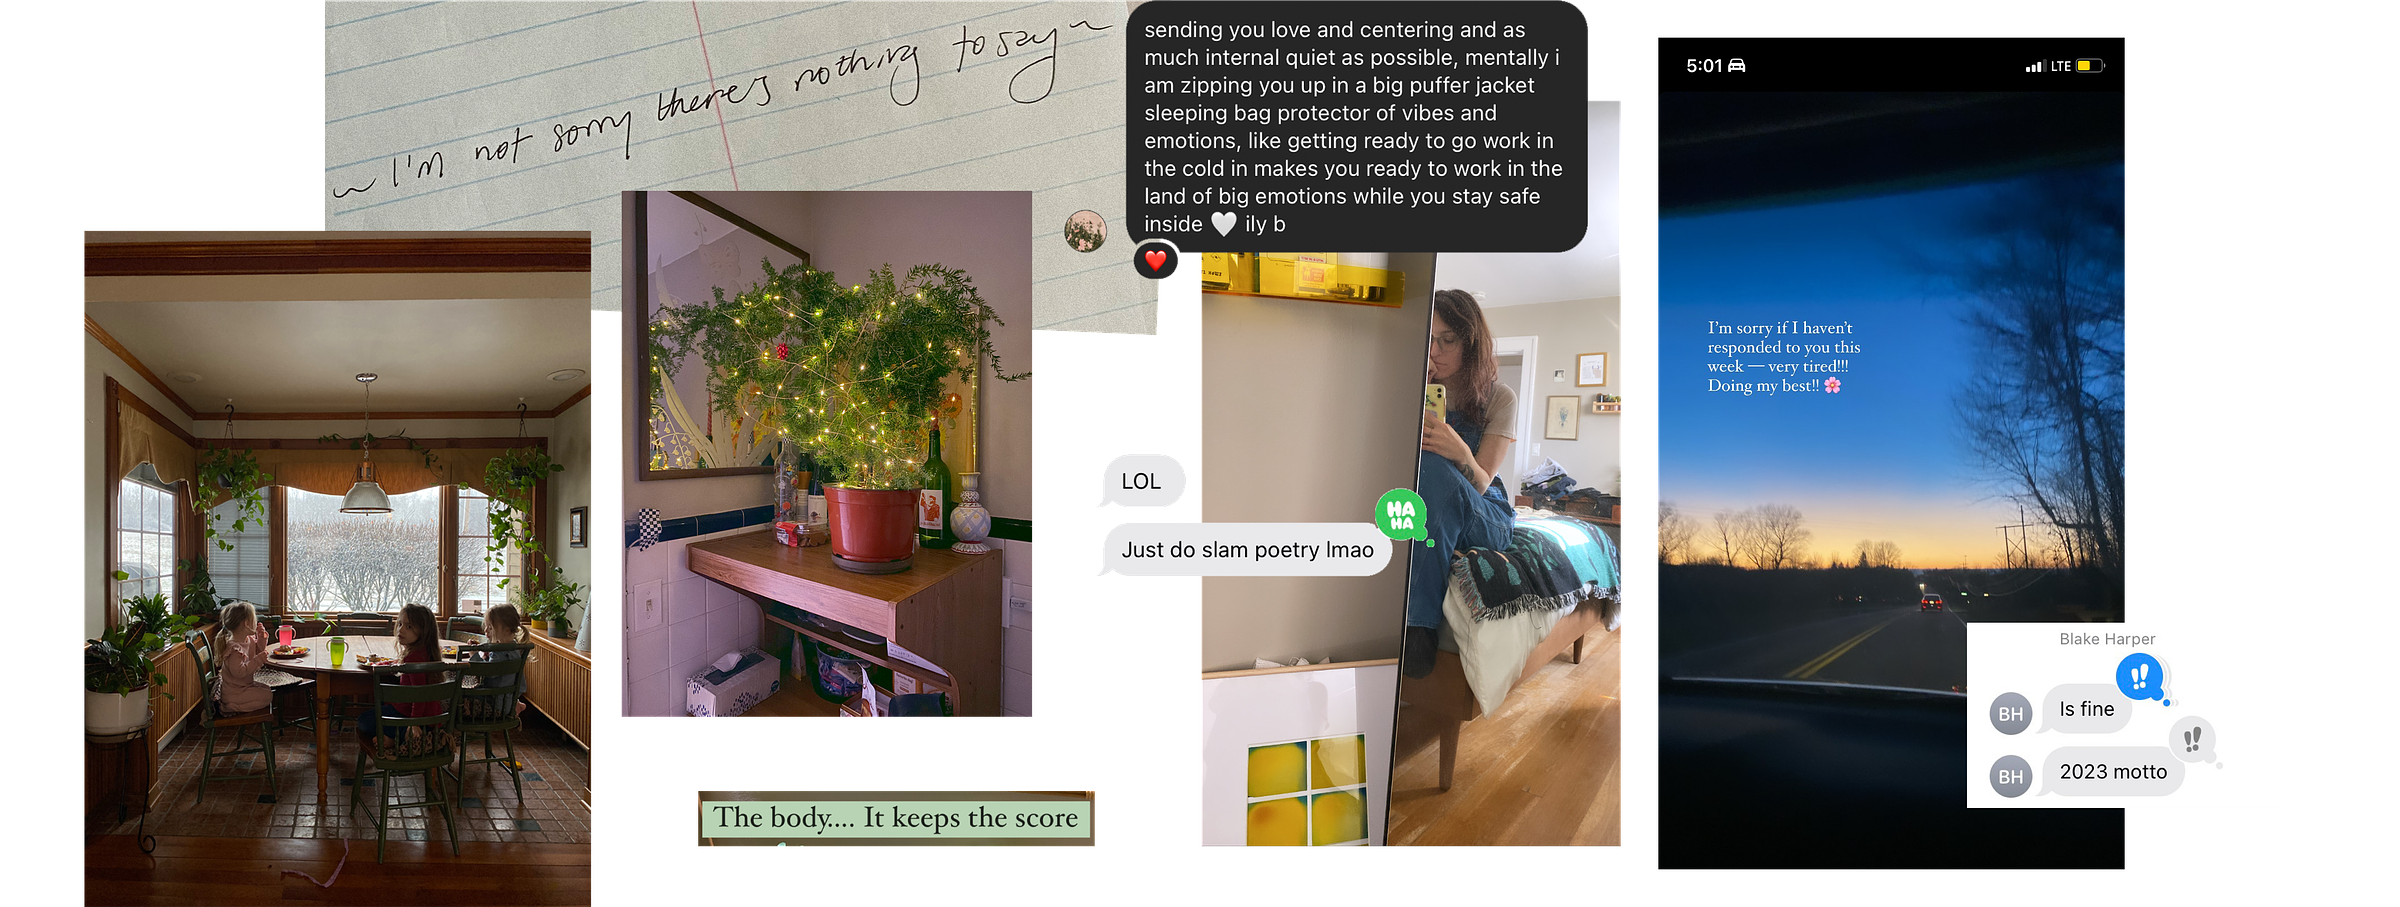 a collage of images and text. From left to right, there is a photograph of three kids sitting at a table. There is a large window behind them that takes up a lot of the frame. It looks like winter outside. Above that, there is handwritten text on ruled paper that reads "~I'm not sorry there's nothing to say~" a lyric from a Stars song. Next, there is a photograph of a small pine-type tree with wavy branches that is in a medium size grow pot on a shelf. The small tree has yellow christmas lights on it. Below this image is text on a green background that reads "the body... it keeps the score." The next image to the right is an iphone selfie of the author in their bedroom mirror. Layered on top of the selfie is a text exchange that reads "LOL just do slam poetry lmao" and above that is another text exchange, this one from Cecilia, that reads "sending you love and centering and as much internal quiet as possible, mentally i am zipping you up in a big puffer jacket sleeping bag protector of vibes and emotions, like getting ready to go work in the cold it makes you ready to work in the land of big emotions while you stay safe inside. ily b" Next to that, to the right, is a photograph at sunset looking out at the road from inside a car. The sky is blue and orange, and on top of the photograph is written in serif font: "I'm sorry if I haven't responded to you this week -- very tired! Doing my best!" Lastly, at the bottom right there is a text from Blake Harper that reads "is fine. 2023 motto"